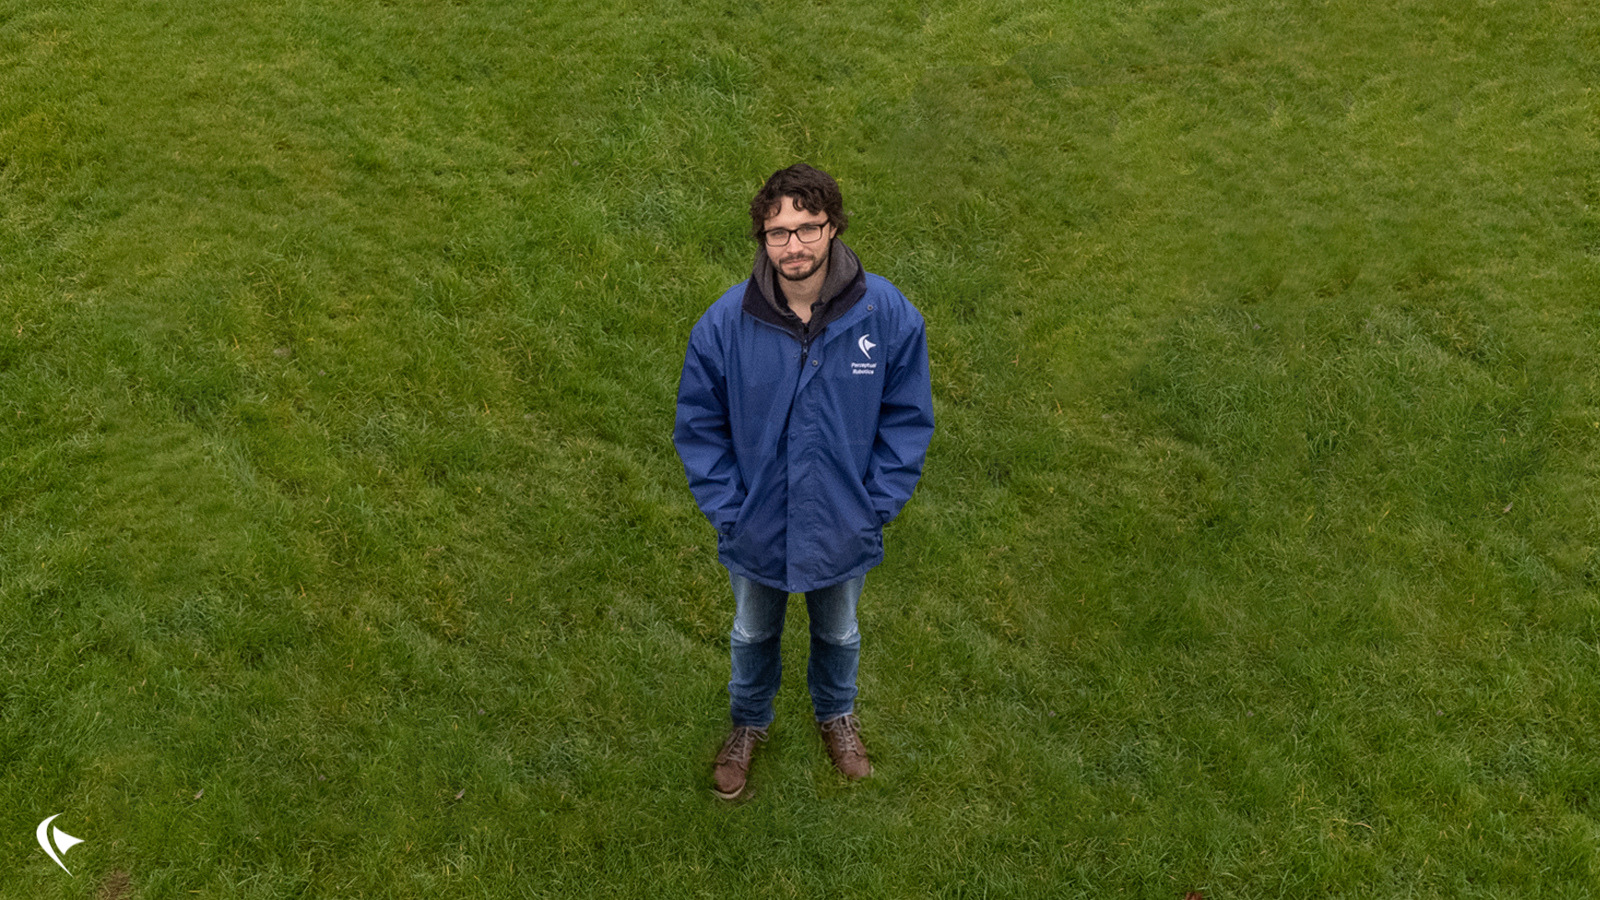 This is an image taken by a drone of Rob outside.